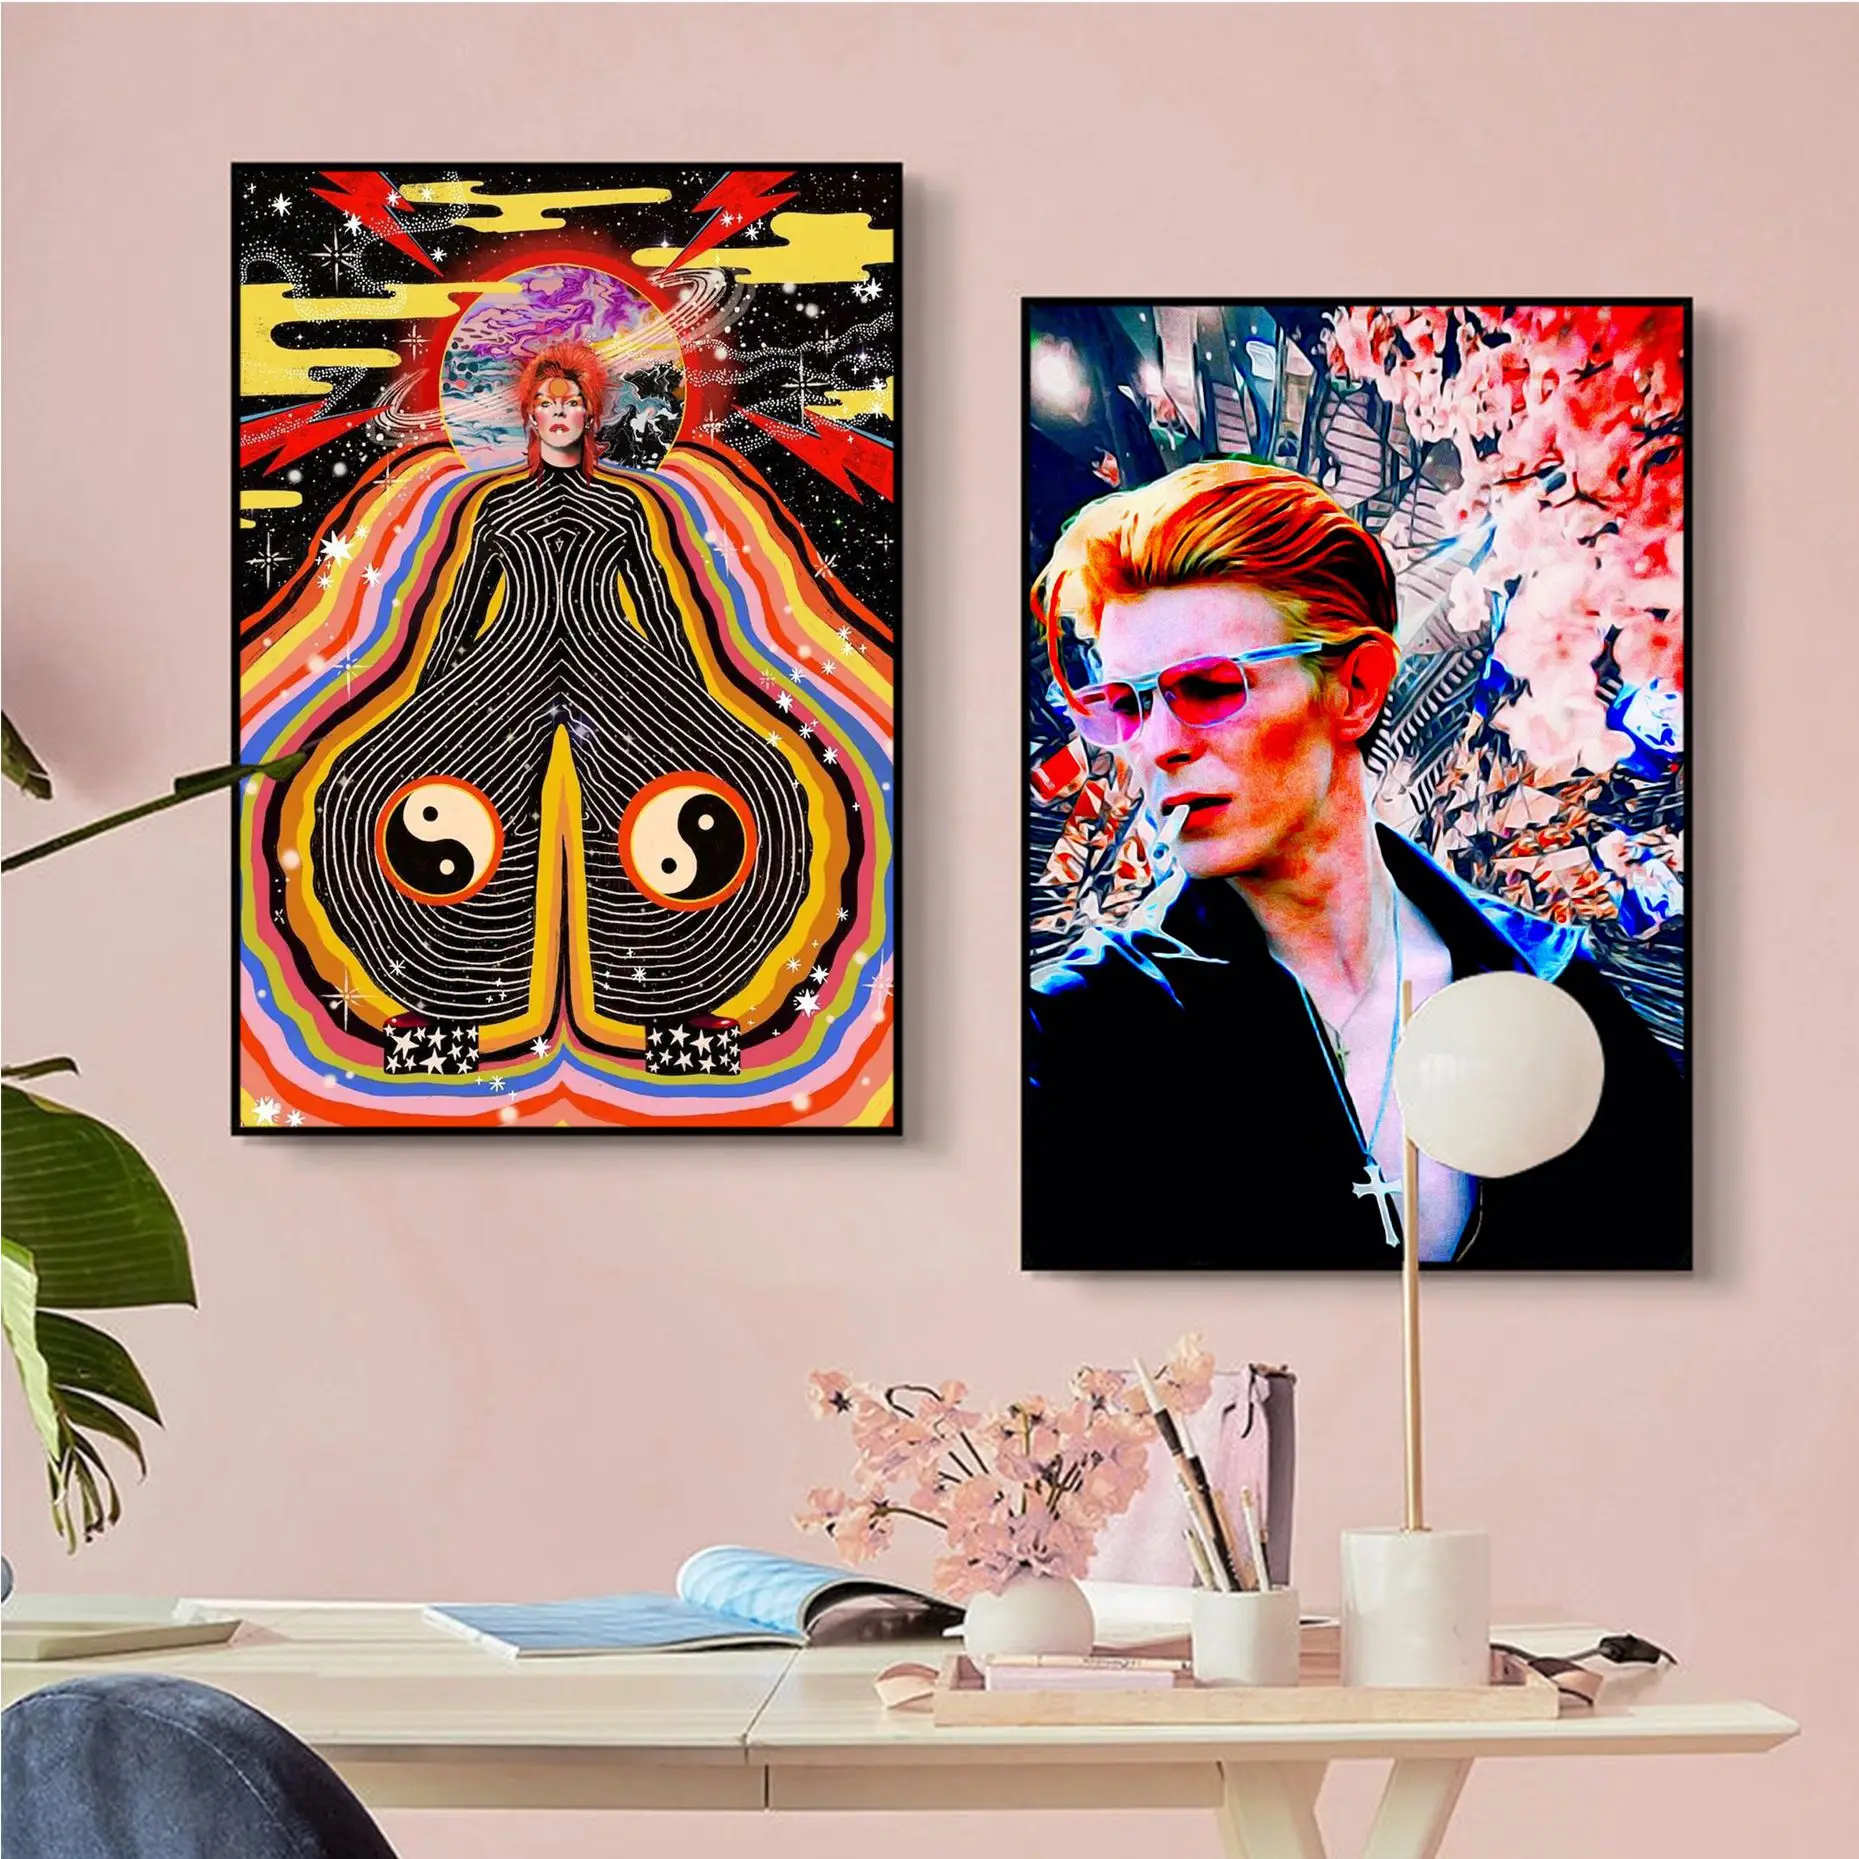 

British Rock Singer D-David-B-Bowie Self-adhesive Art Poster Vintage Room Bar Cafe Decor Aesthetic Art Wall Painting